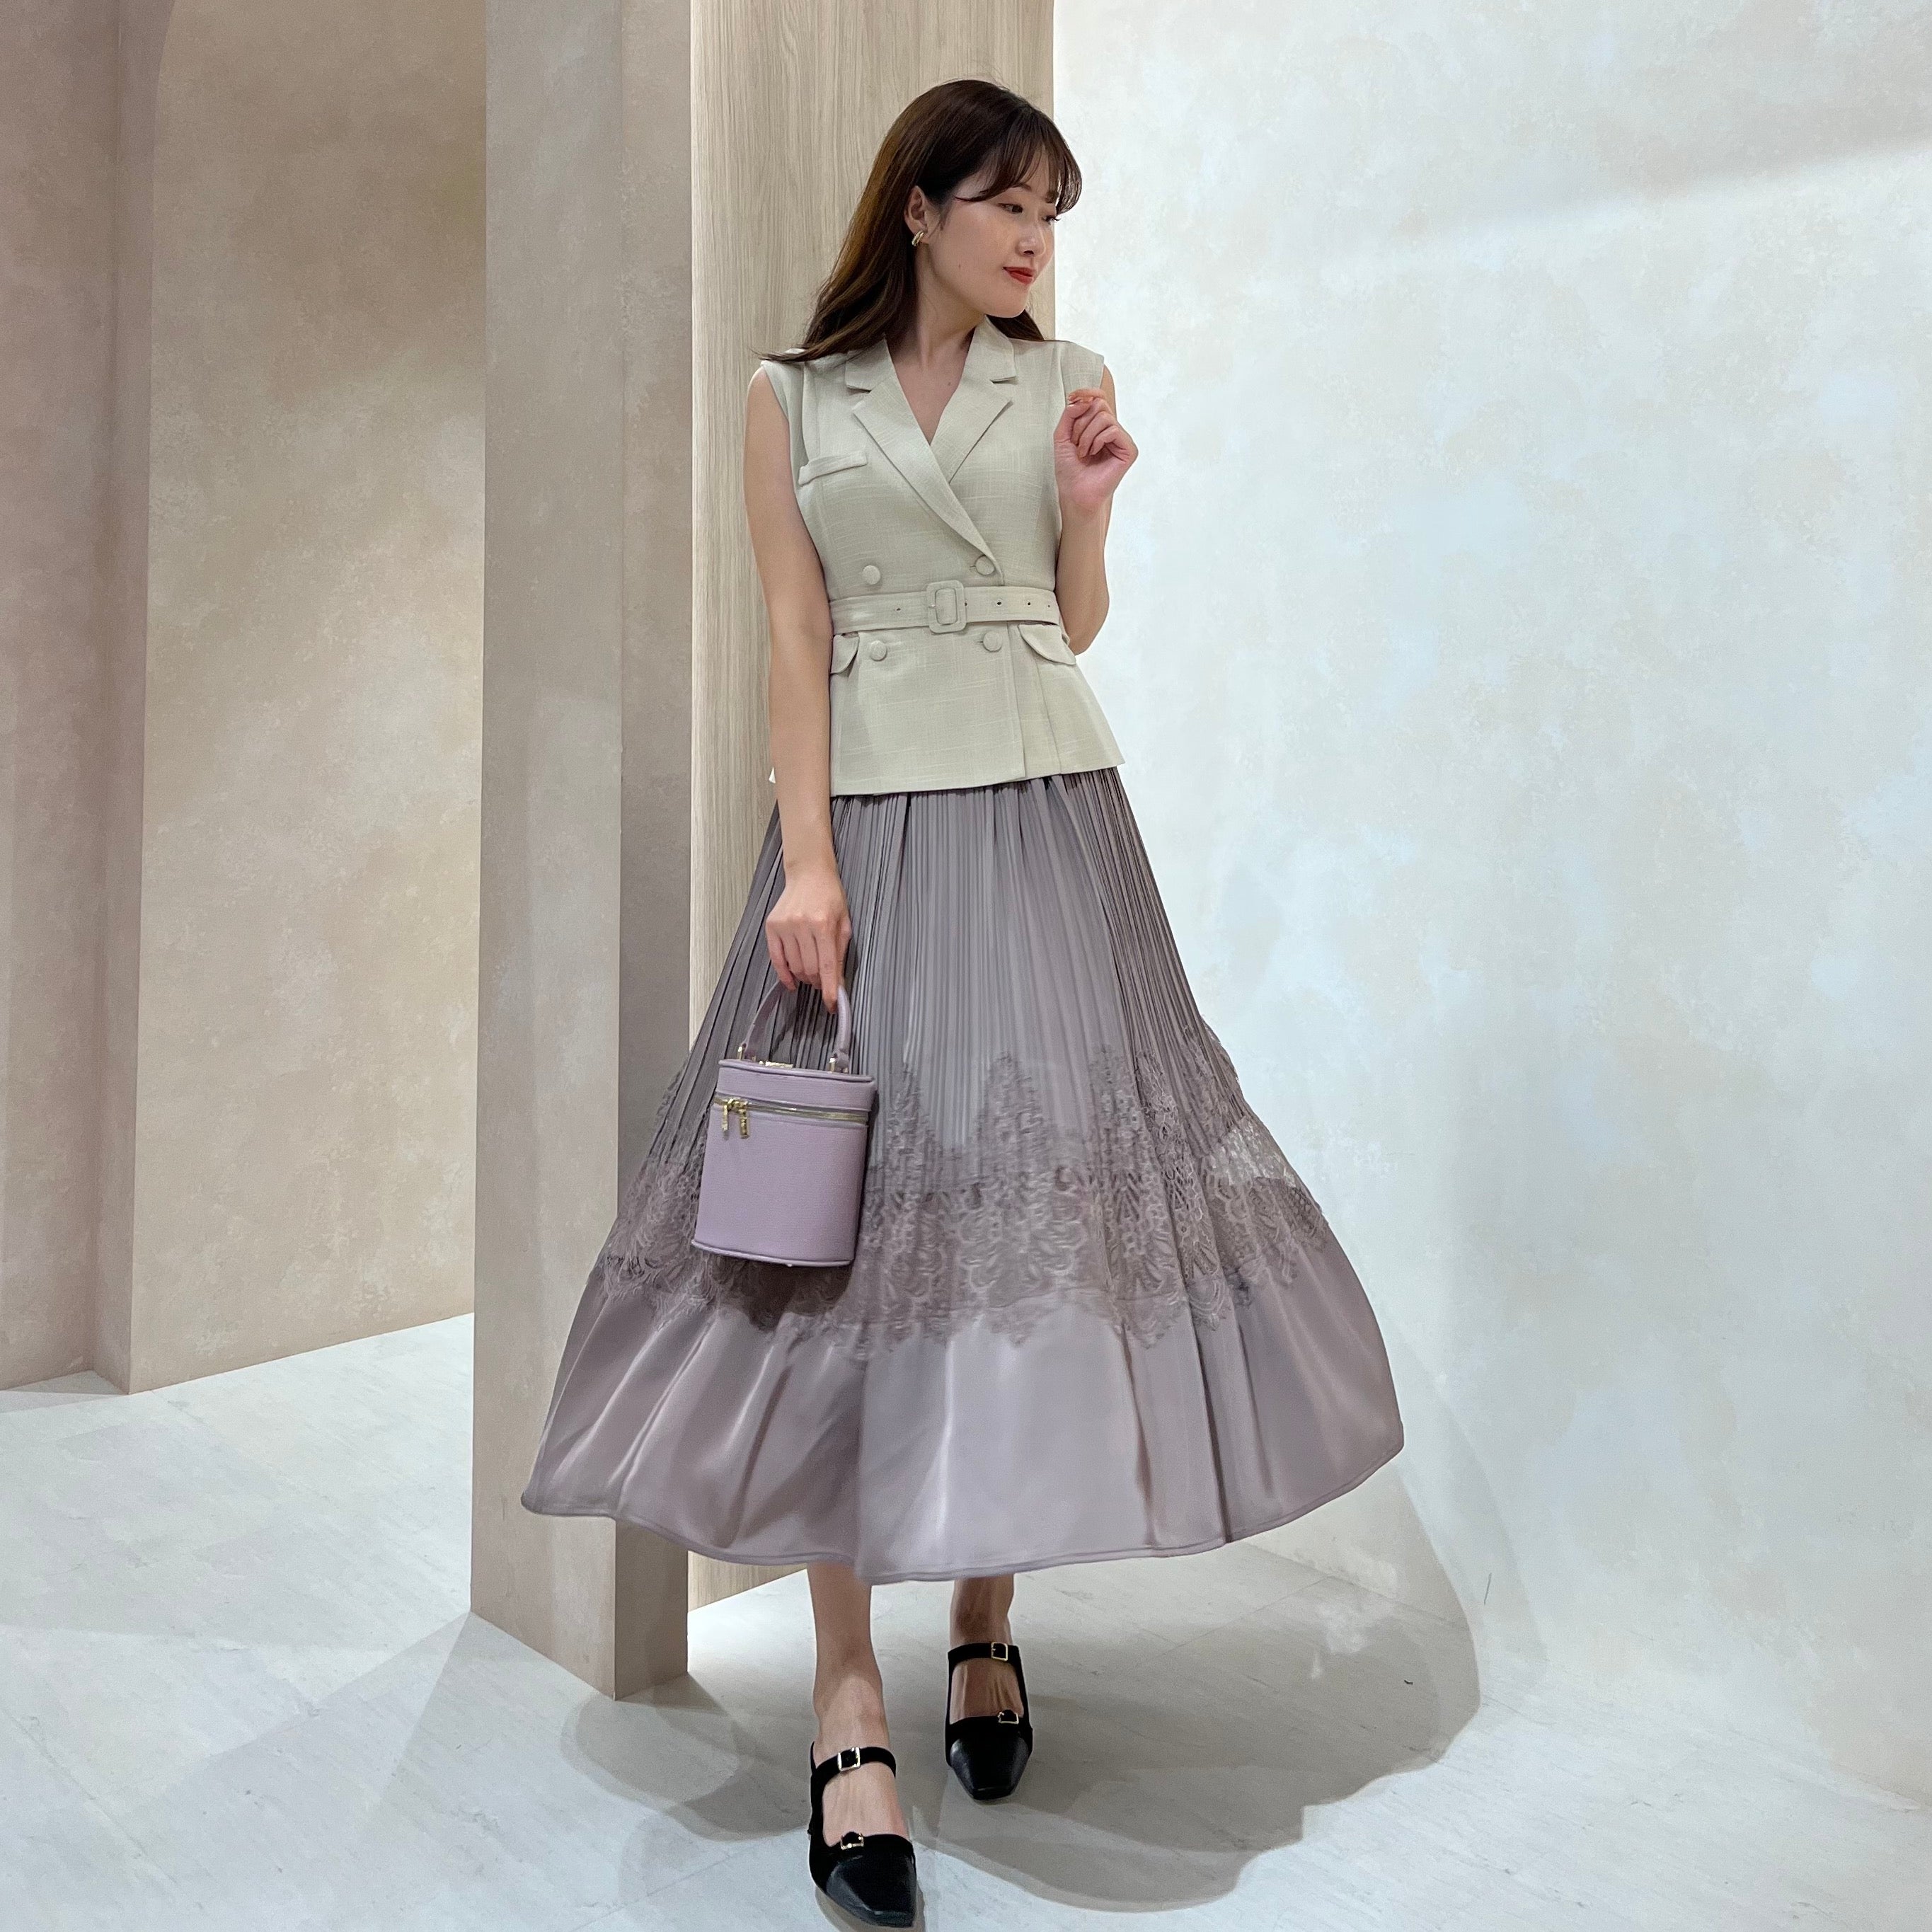 Her lip to Meurice Pleated Lace Dress - ロングワンピース/マキシ